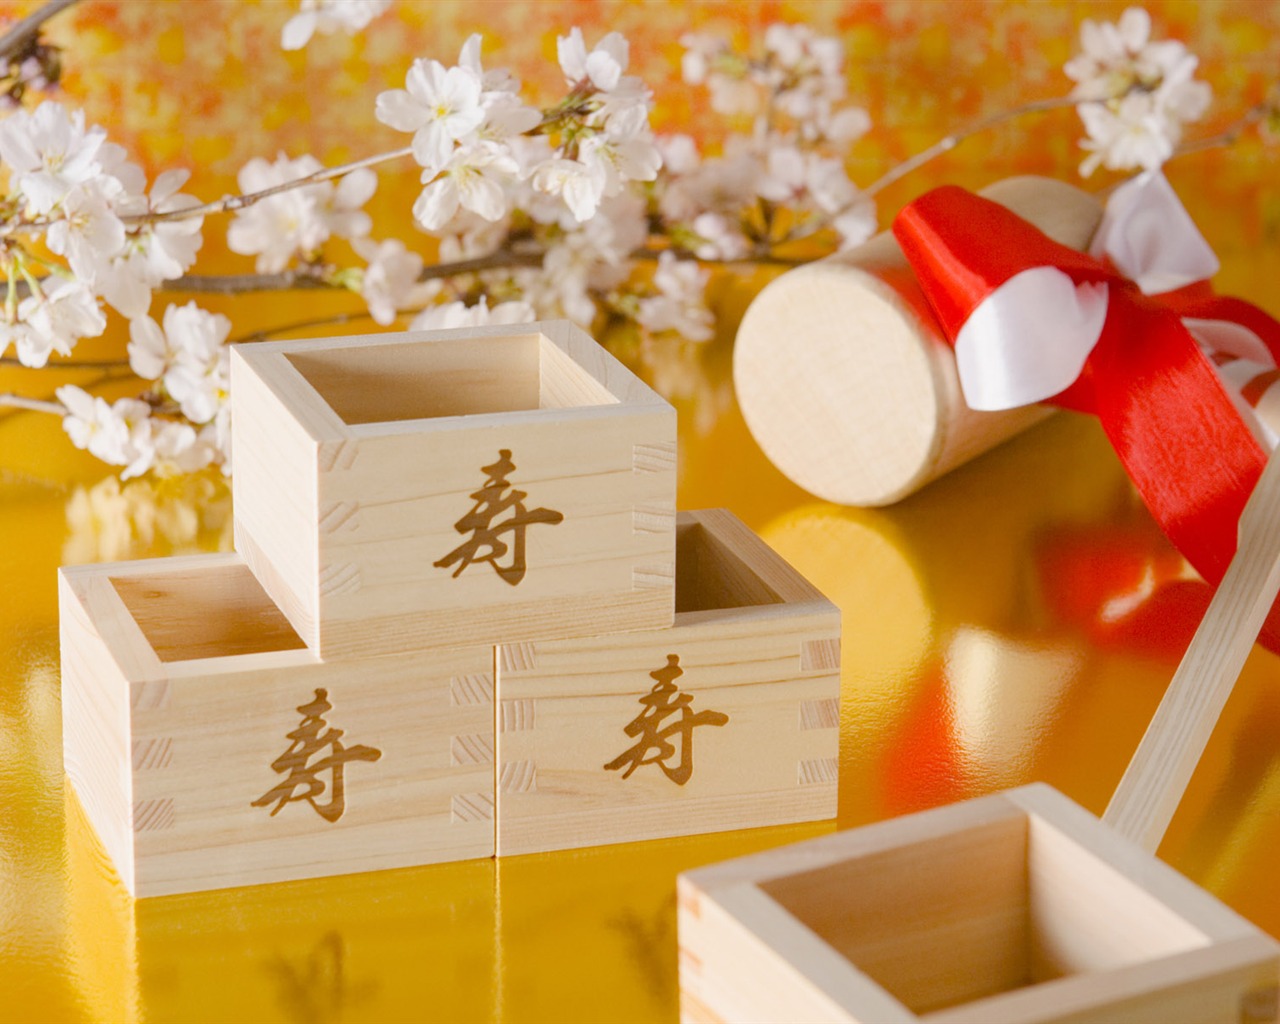 Japanese New Year Culture Wallpaper (2) #11 - 1280x1024